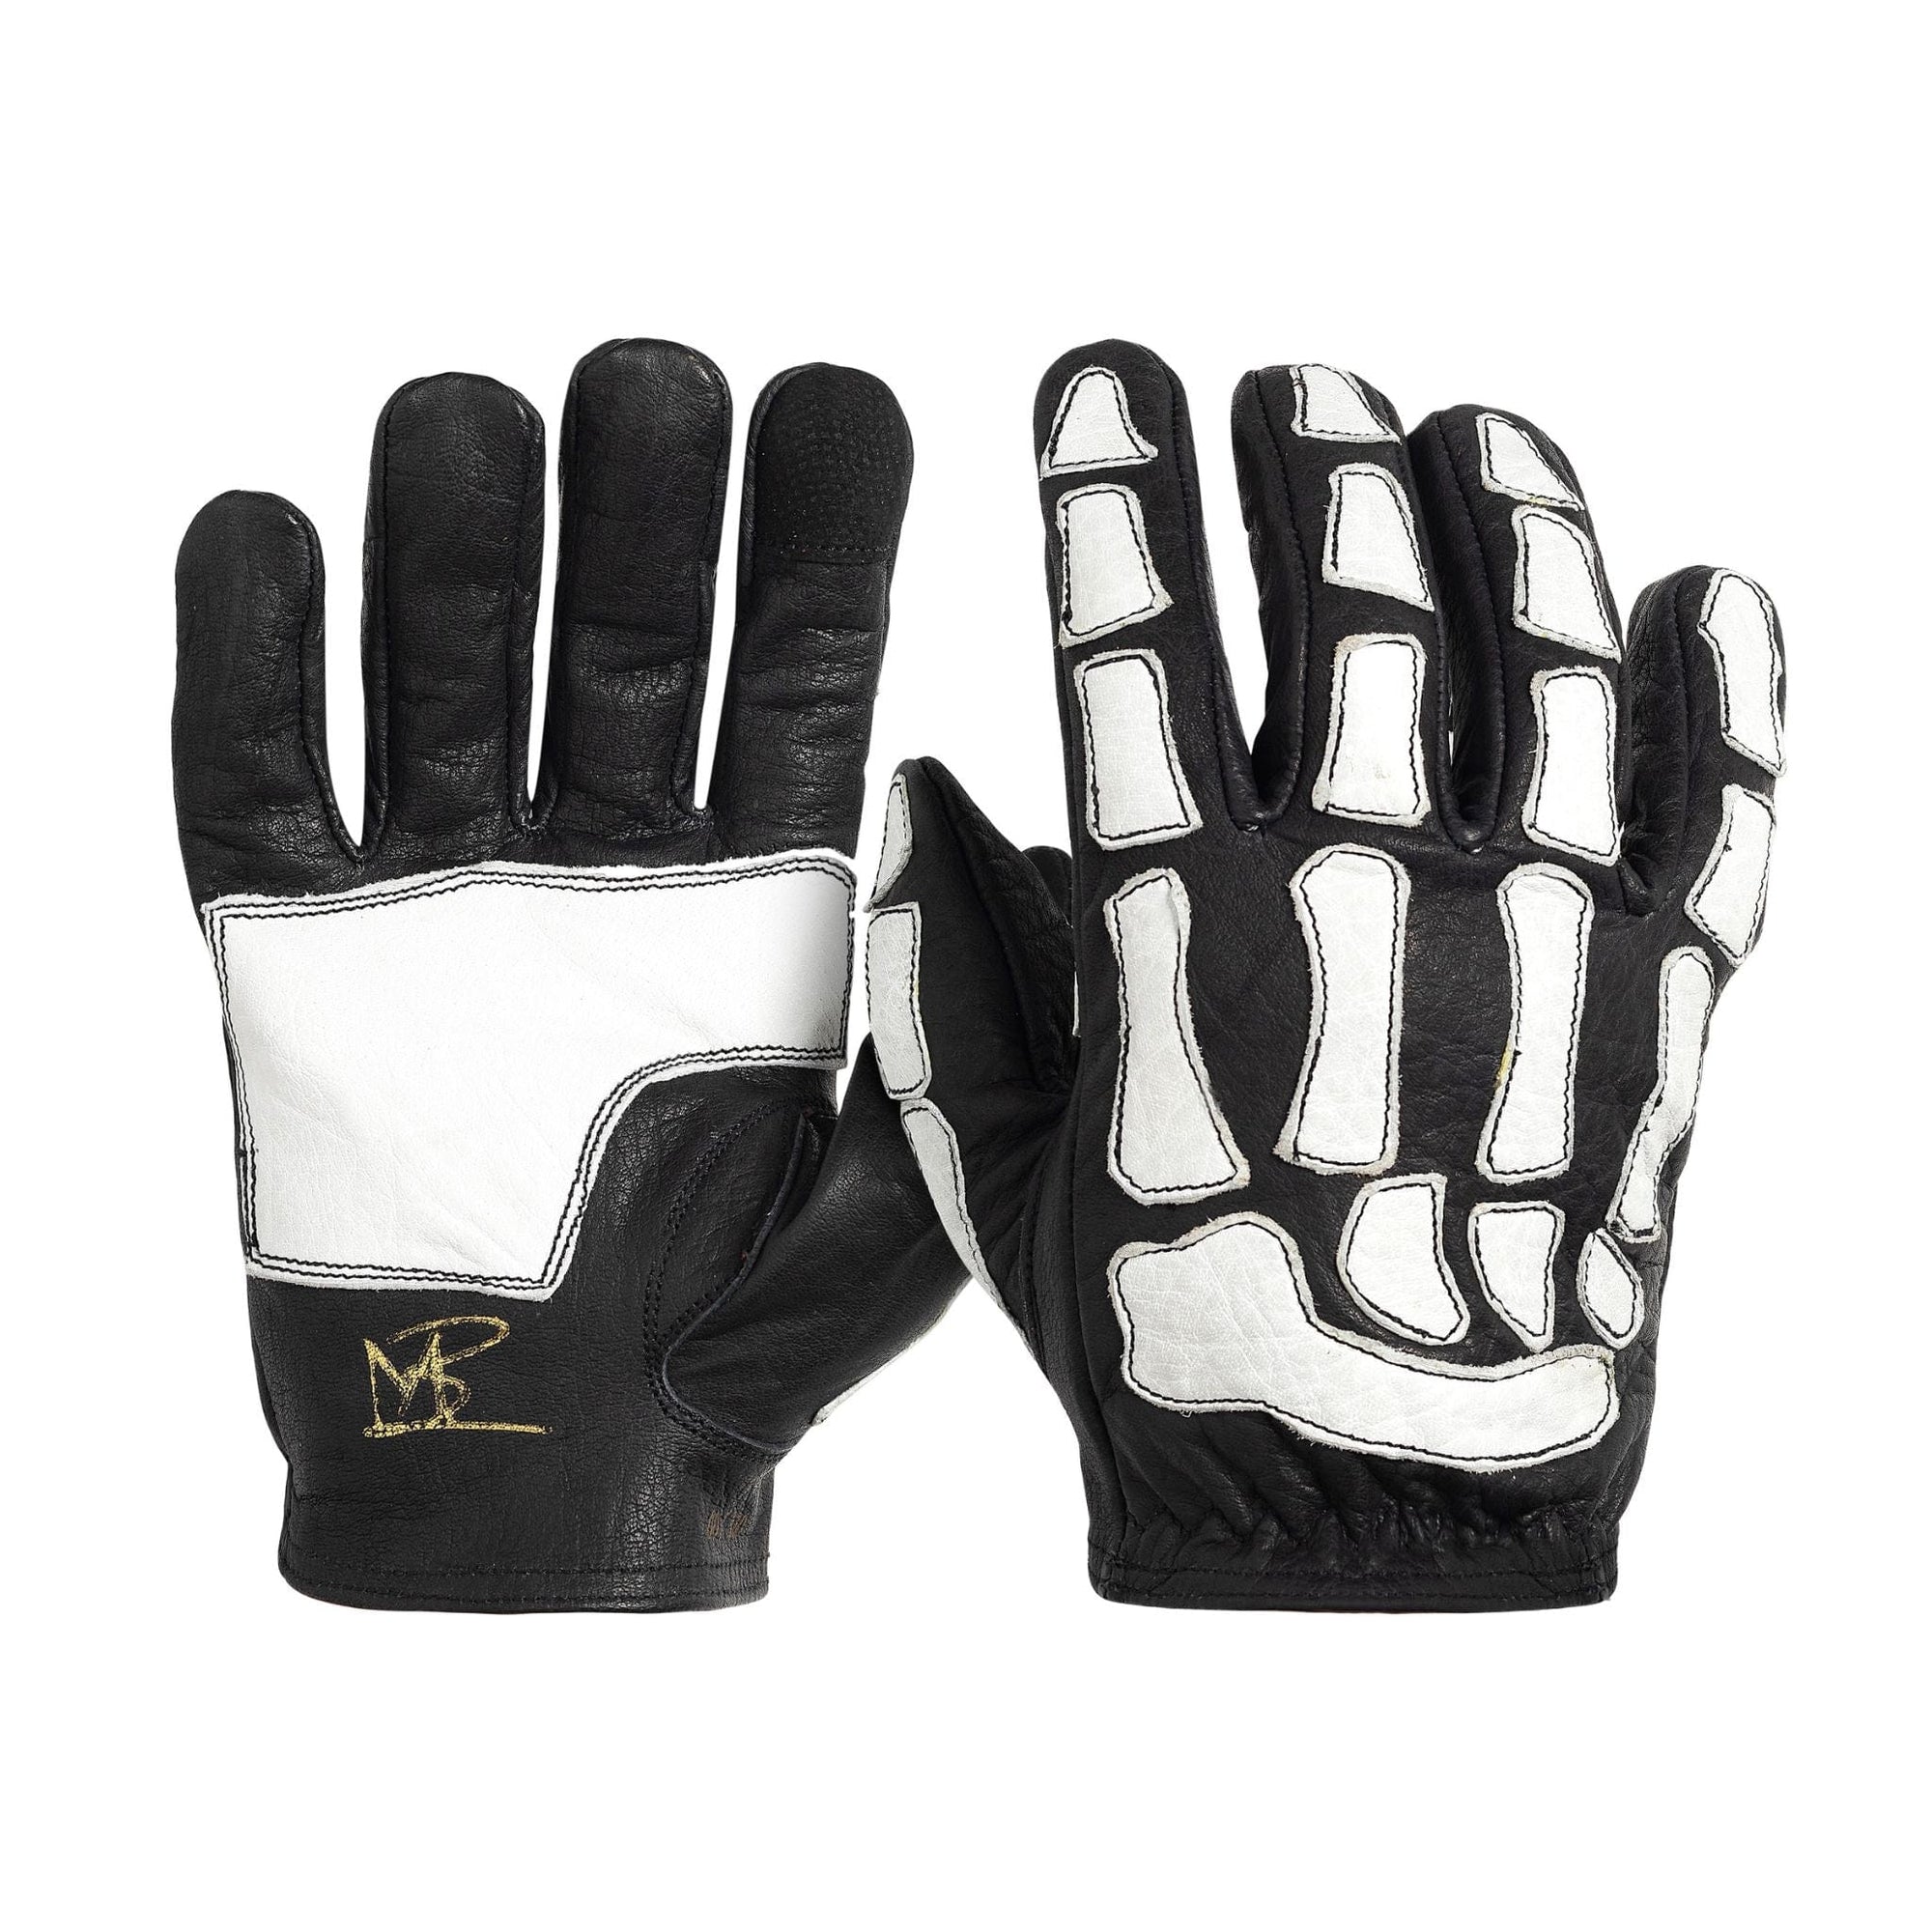 Maroon Bell Outdoor® Gloves XS Skeleton Leather Motorcycle Glove - Black-White